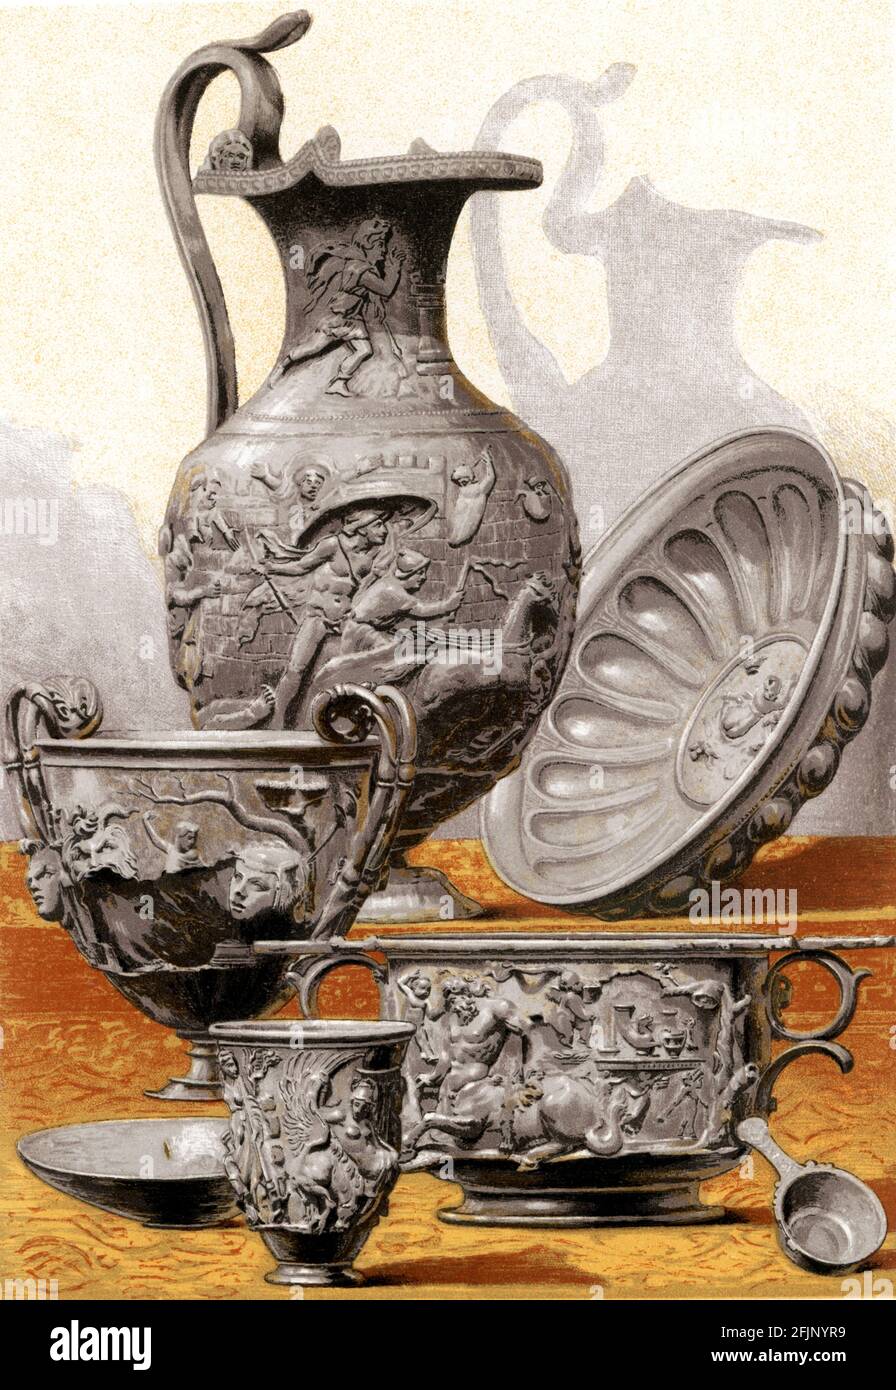 This 1884 illustration shows Silver Vases found at Bernay. Accidentally discovered by a French farmer in 1830 in the village of Berthouville, near the French town of Bernay, the spectacular hoard of gilt-silver statuettes and vessels known as the Berthouville Treasure was originally dedicated to the Gallo-Roman god Mercury. They date from 100 BC to 200 AD, Stock Photo